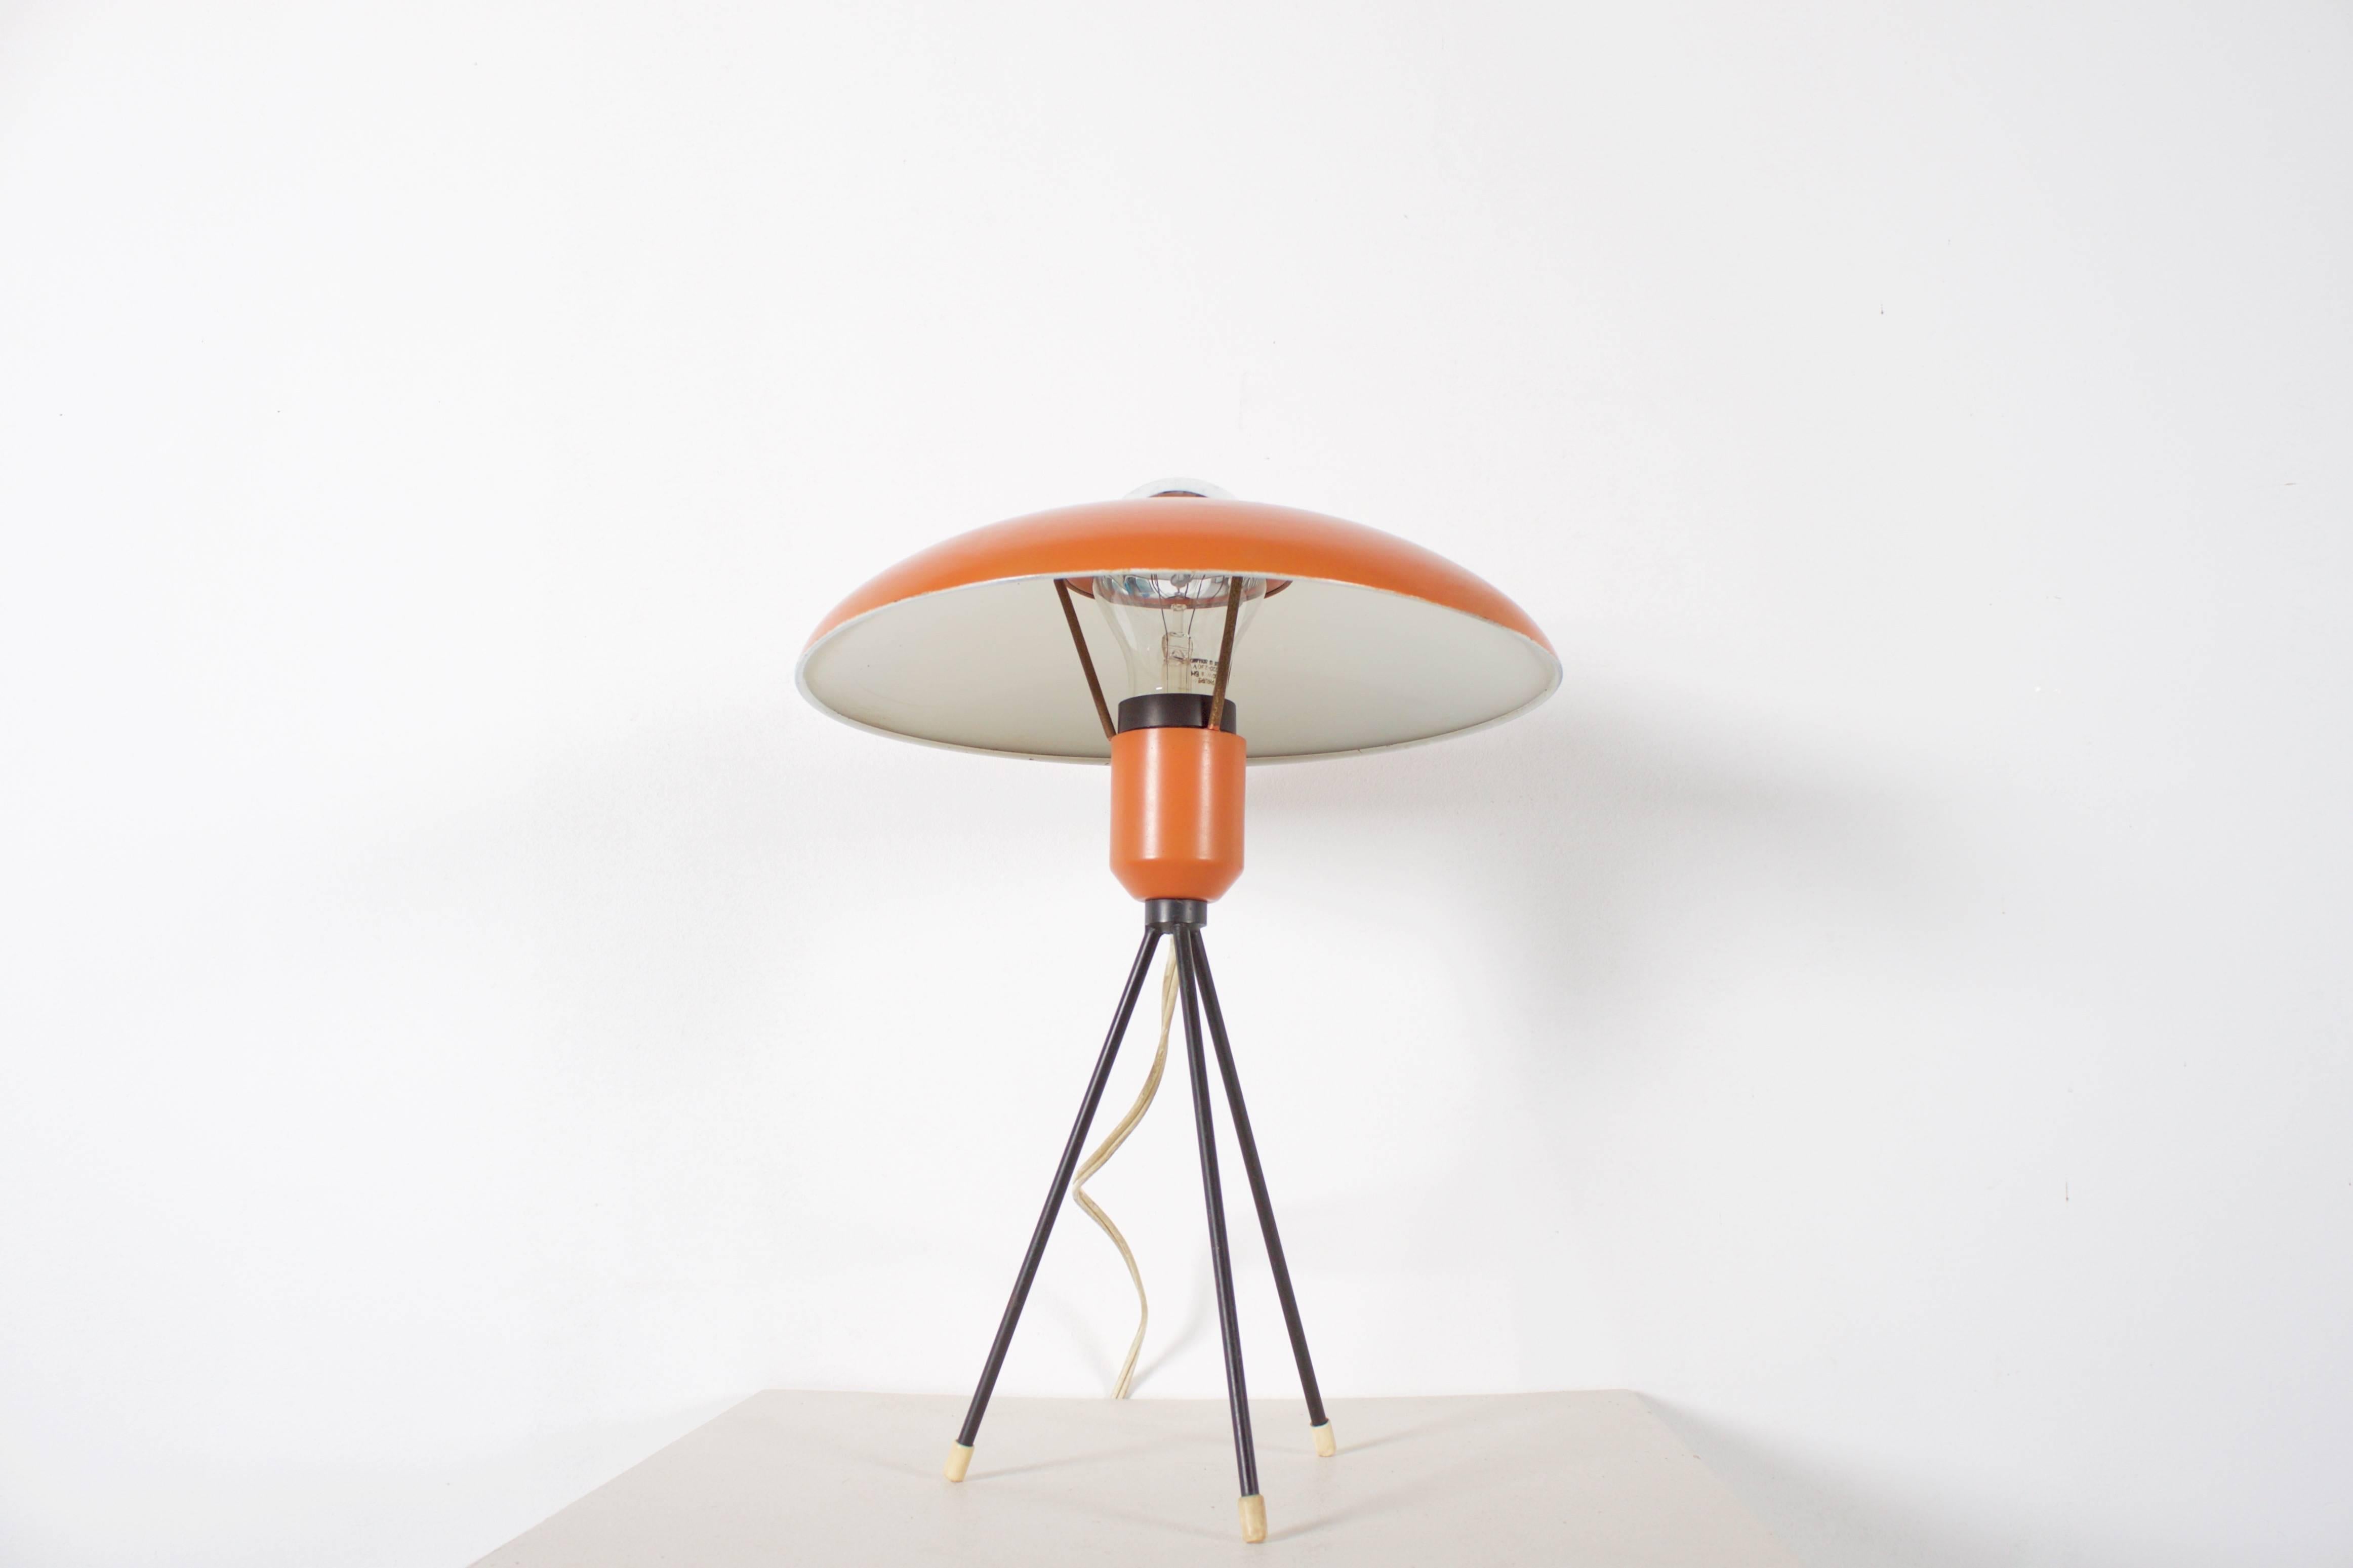 Very rare Louis Kalff tripod table lamp.

Manufacturer: Philips.

Shade lacquered in orange, tripod lacquered black.

White rubber feet.

The lamp has bin rewired.

If you have any questions, please feel free to contact us.

In the style